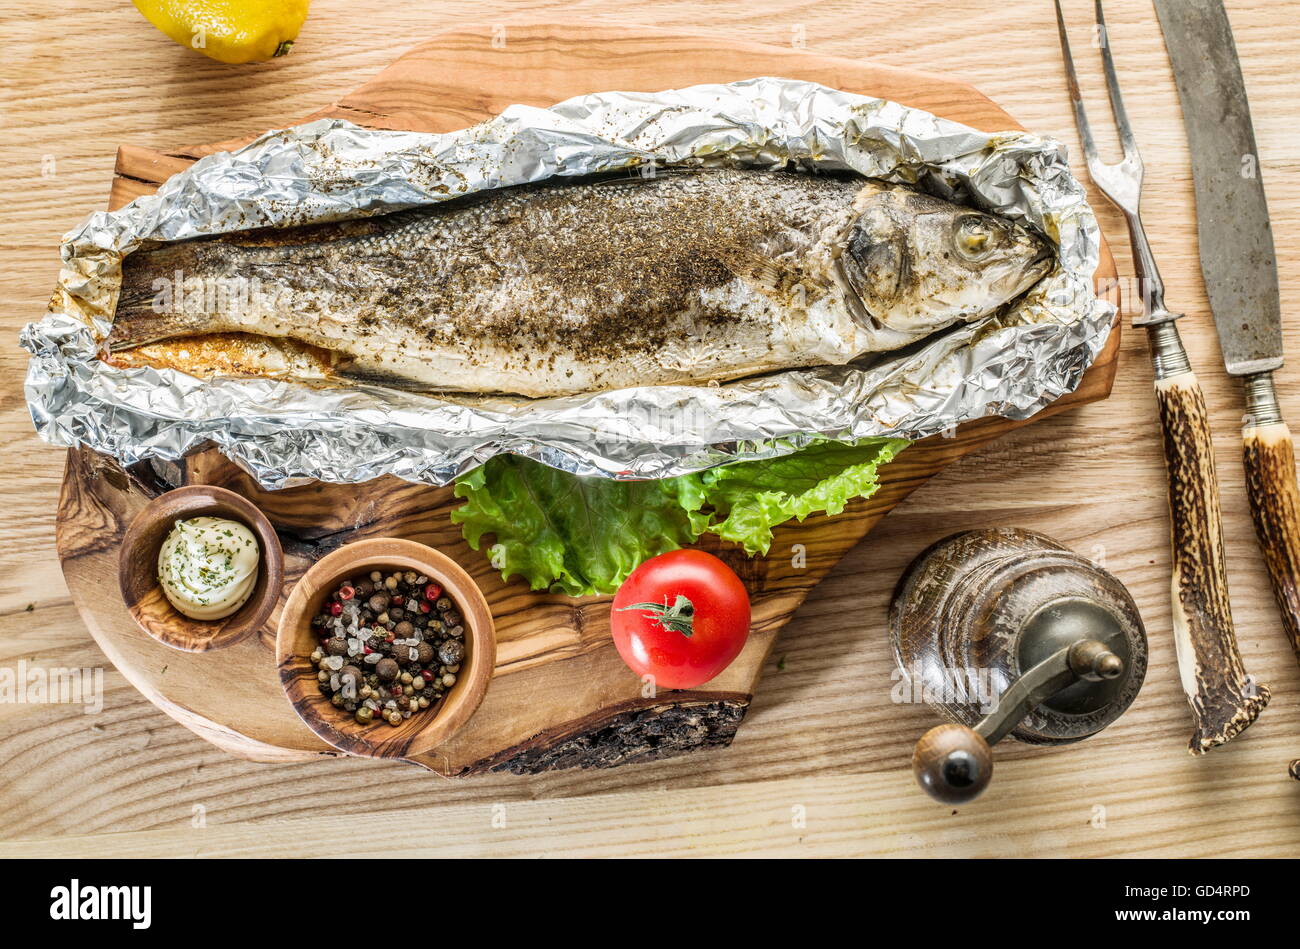 Grilled sea bass fish on the wooden tray. Stock Photo